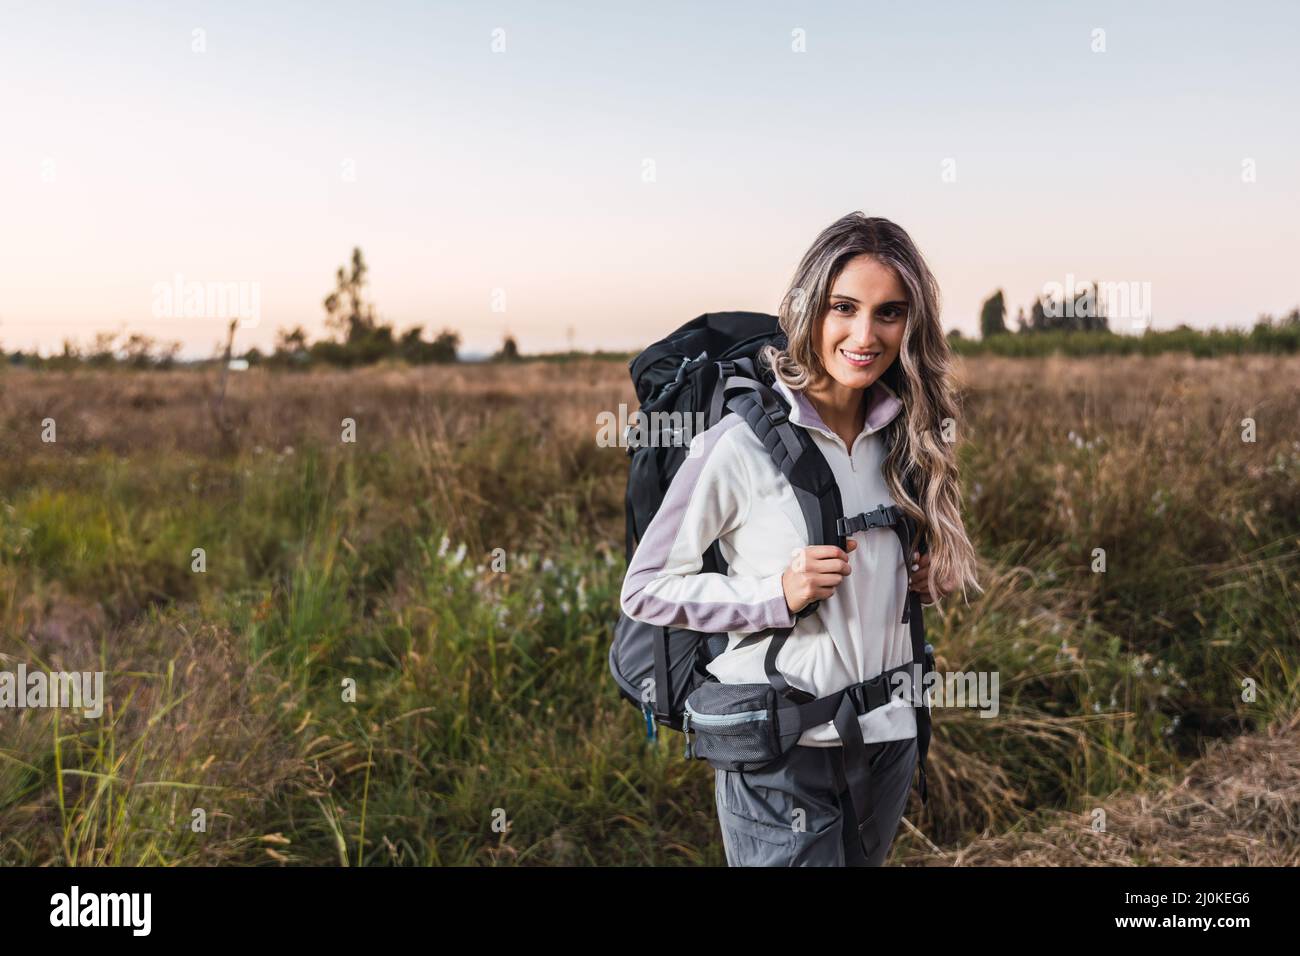 Young woman with a backpack on, ready to start hiking. Teleworking. Digital nomad Stock Photo